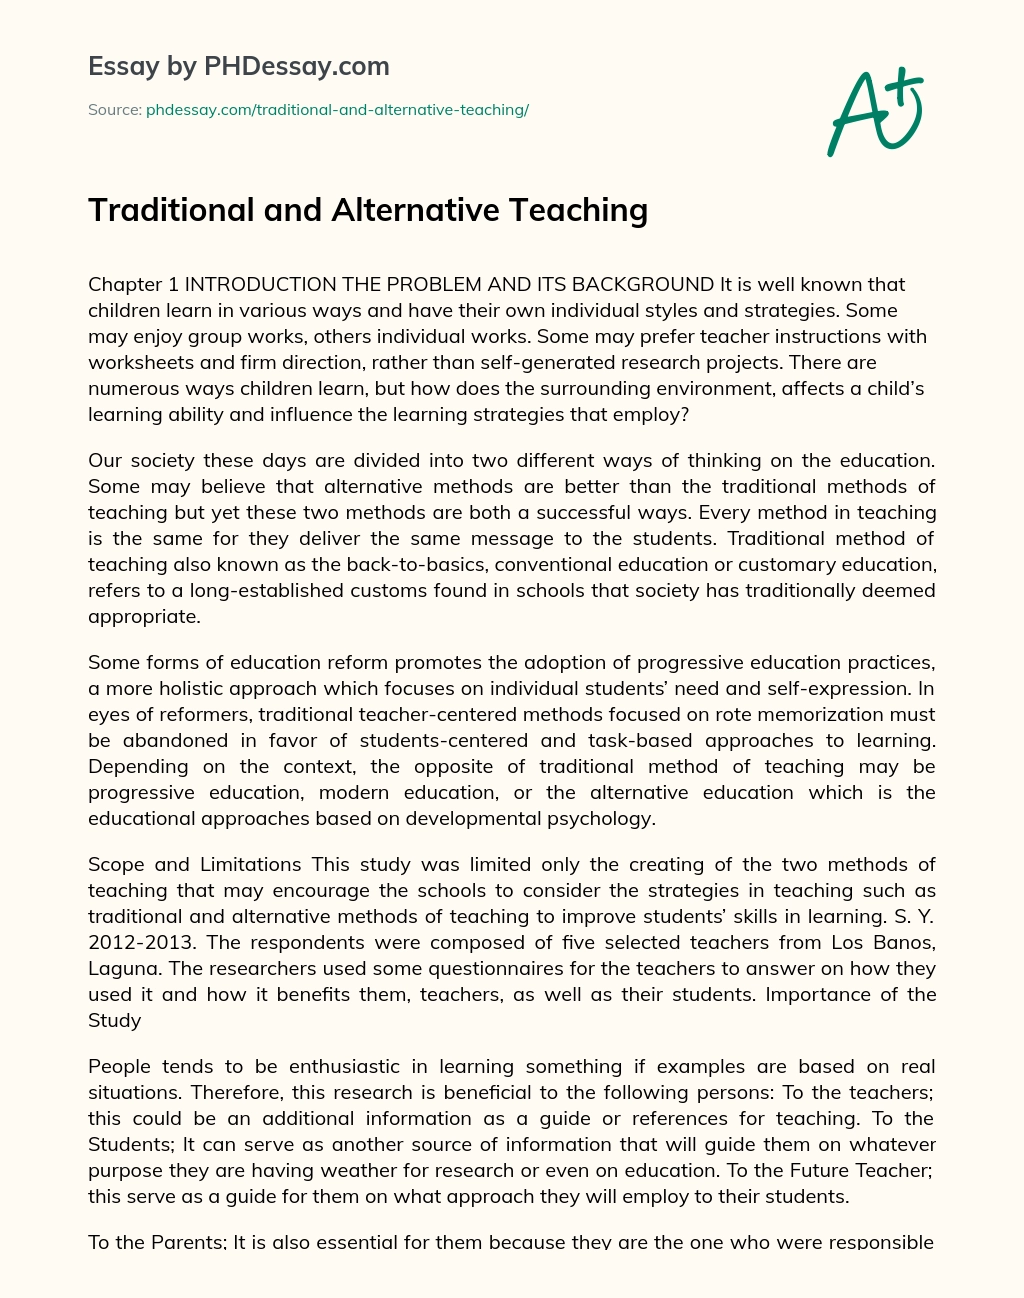 Traditional and Alternative Teaching essay